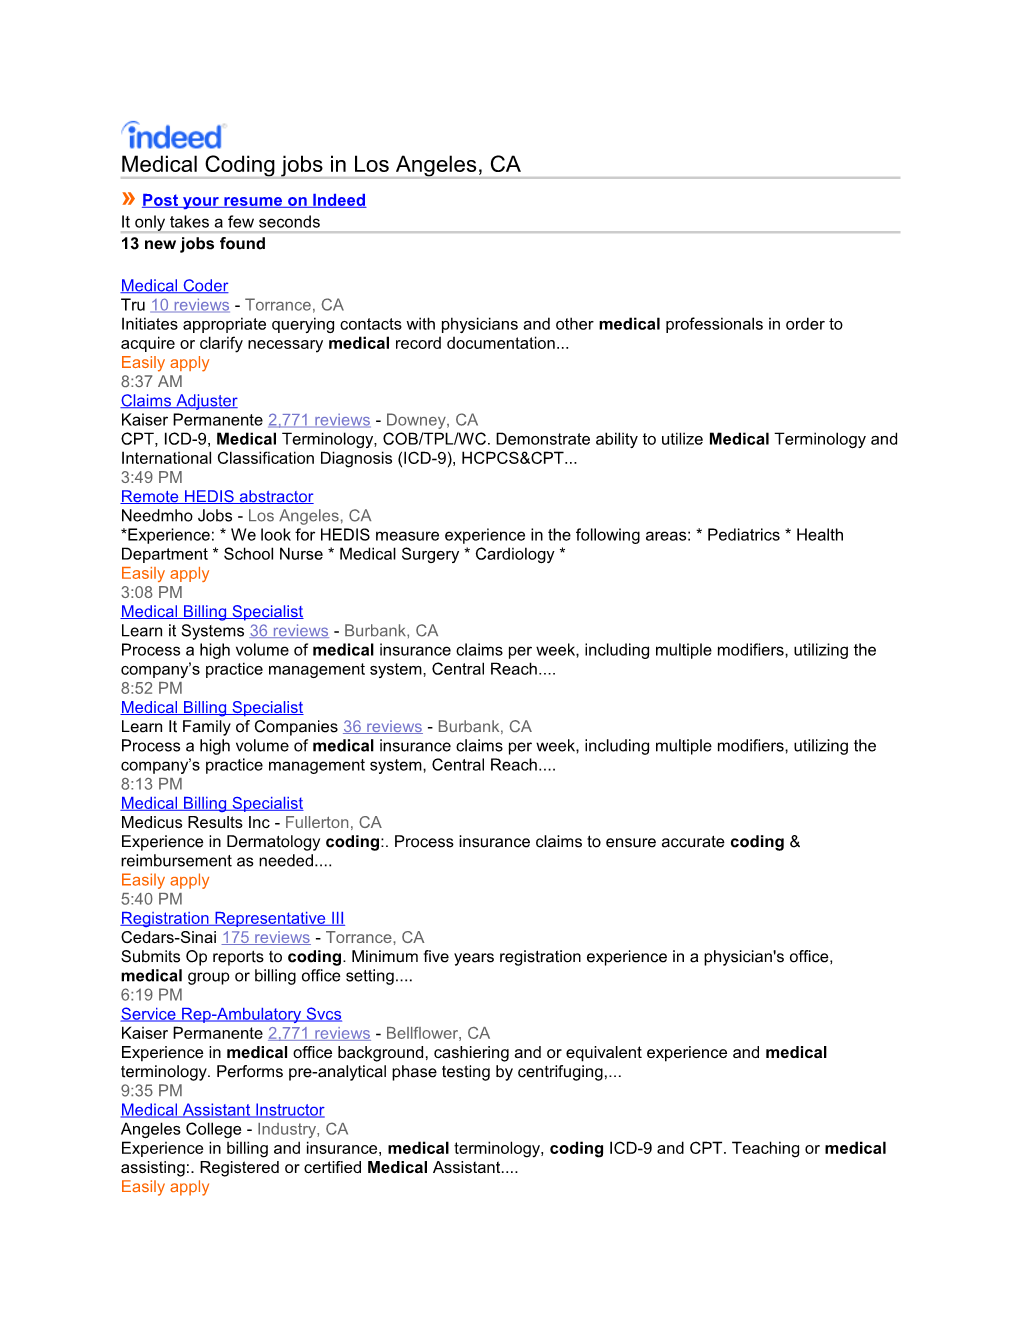 Medical Coding Jobs in Los Angeles, CA